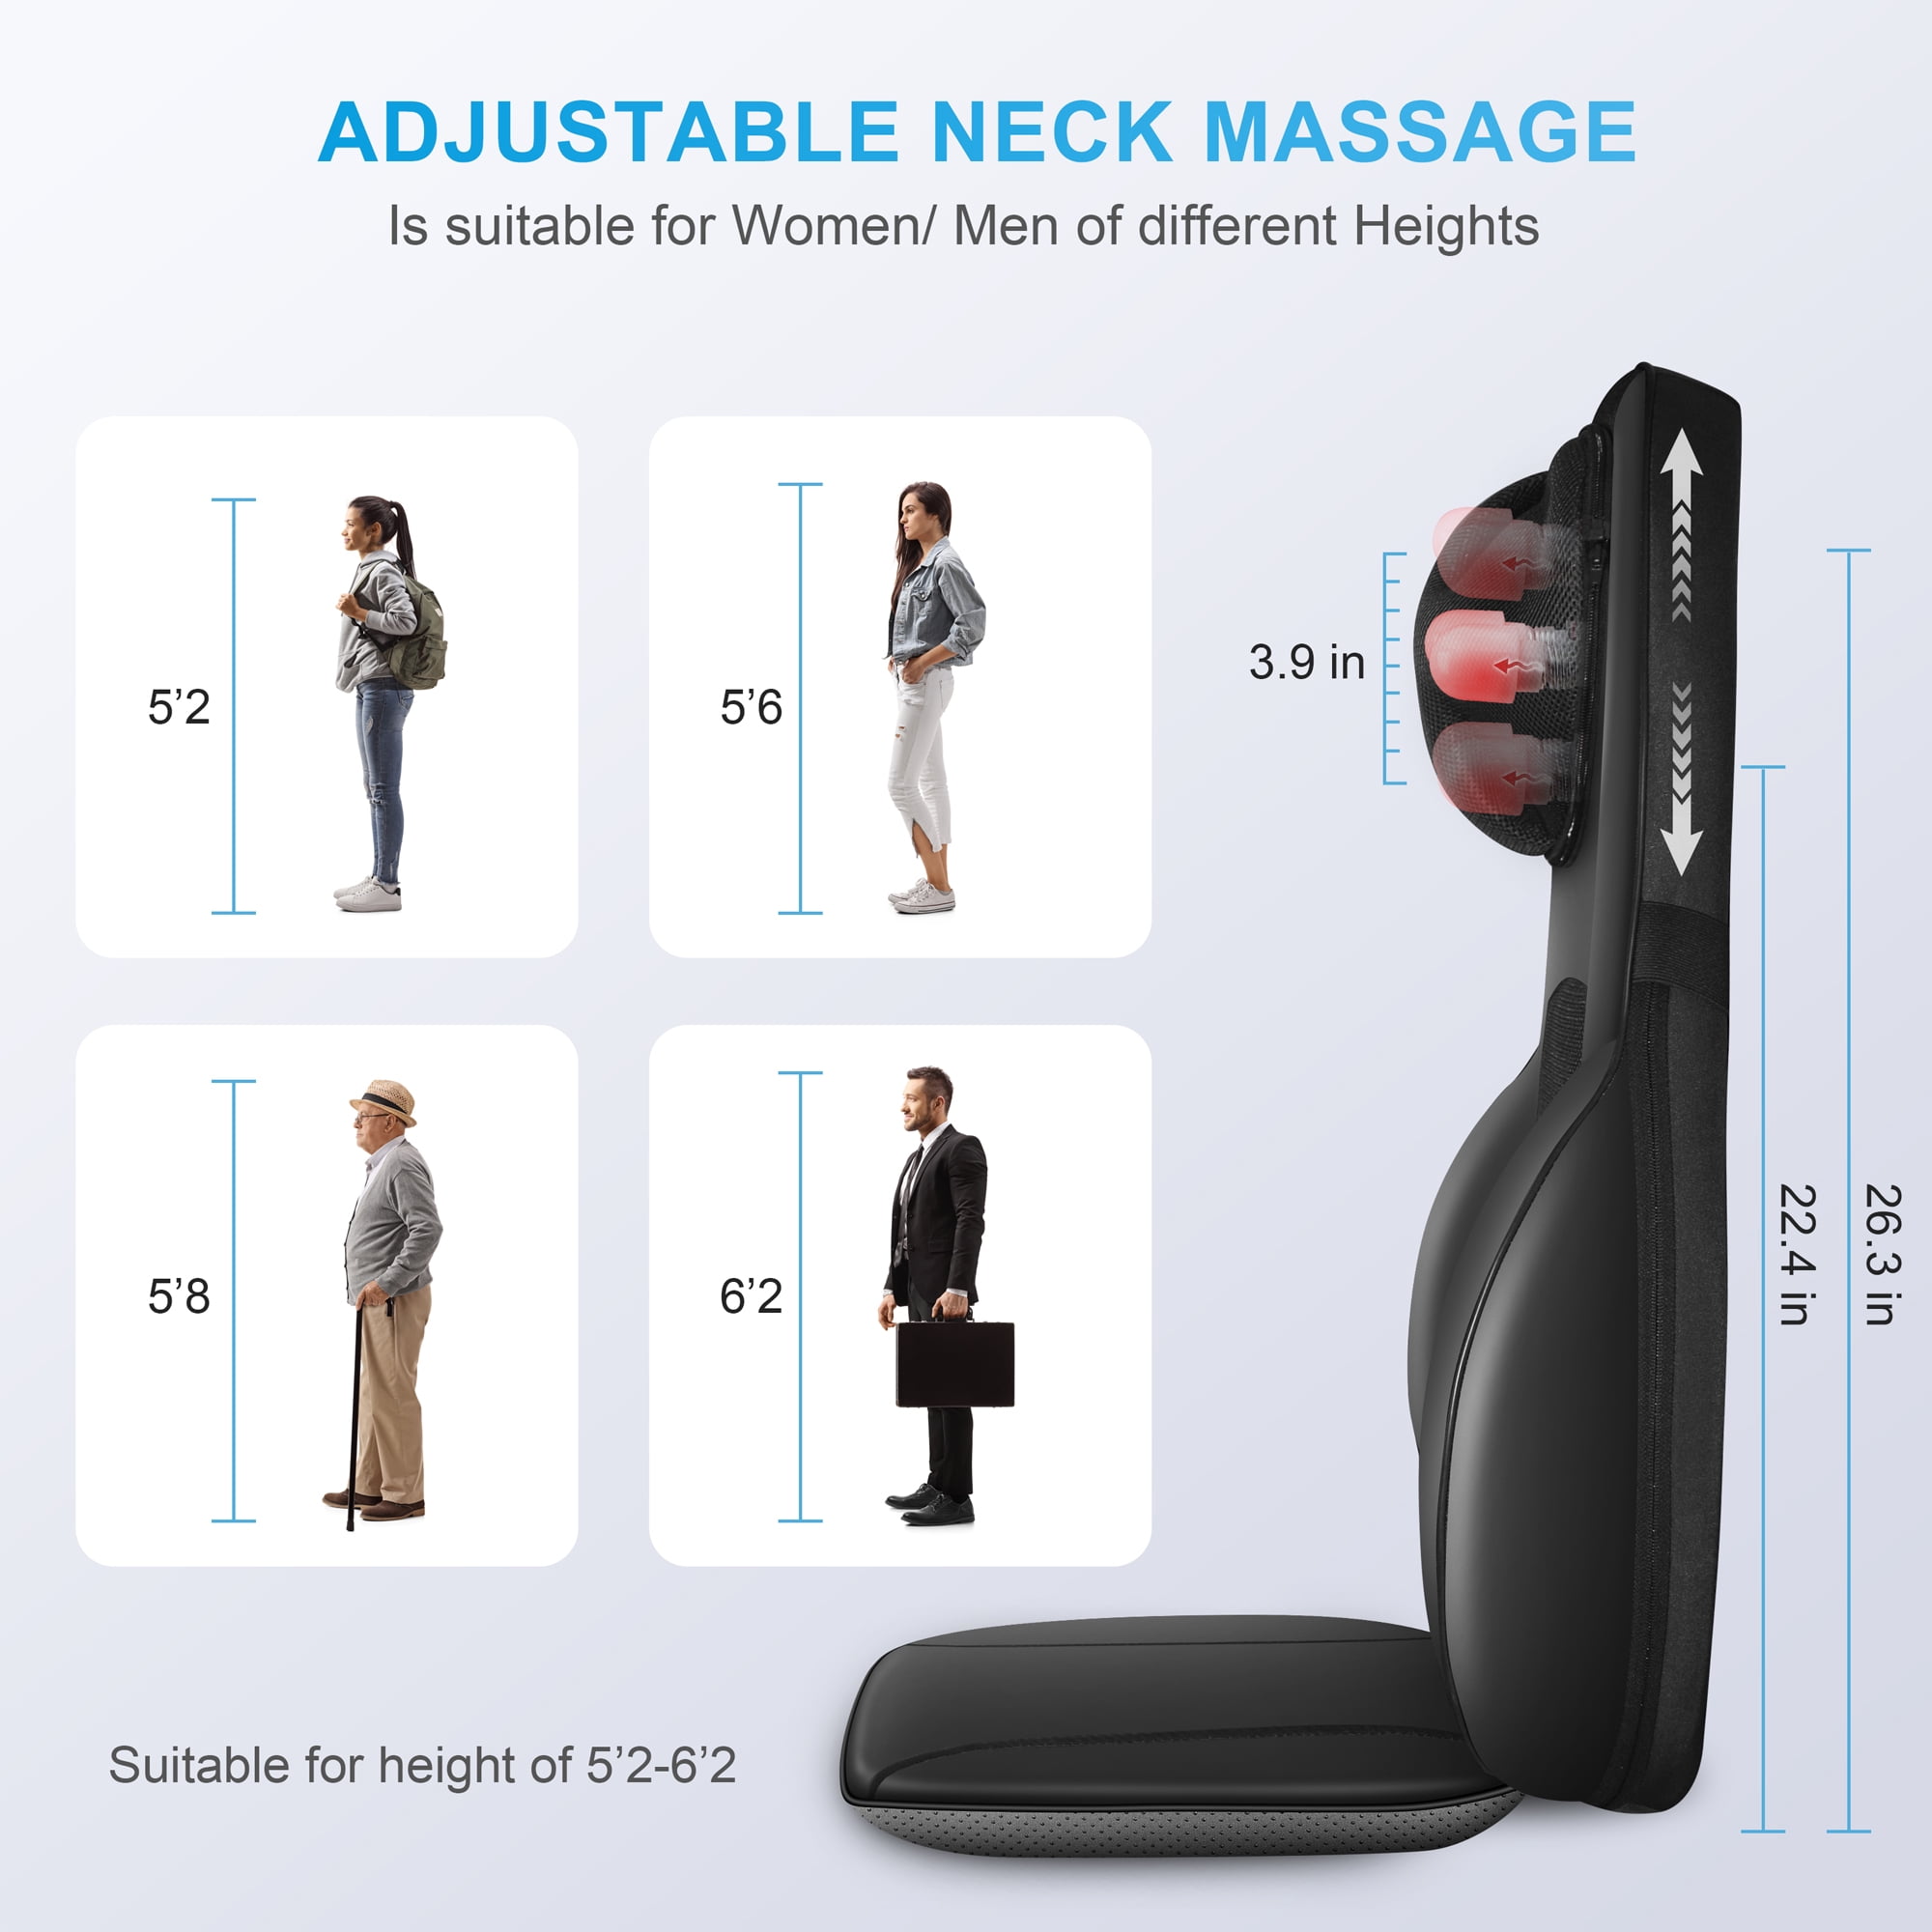  COMFIER Back Massager for Back Pain Relief,APP Control, Shiatsu  Massage Chair Pad,Electric Chair Massagers with Heat,Seat Cushion for  Office,Home,Ideal Gifts for Mom,Dad,Him,Her : Health & Household